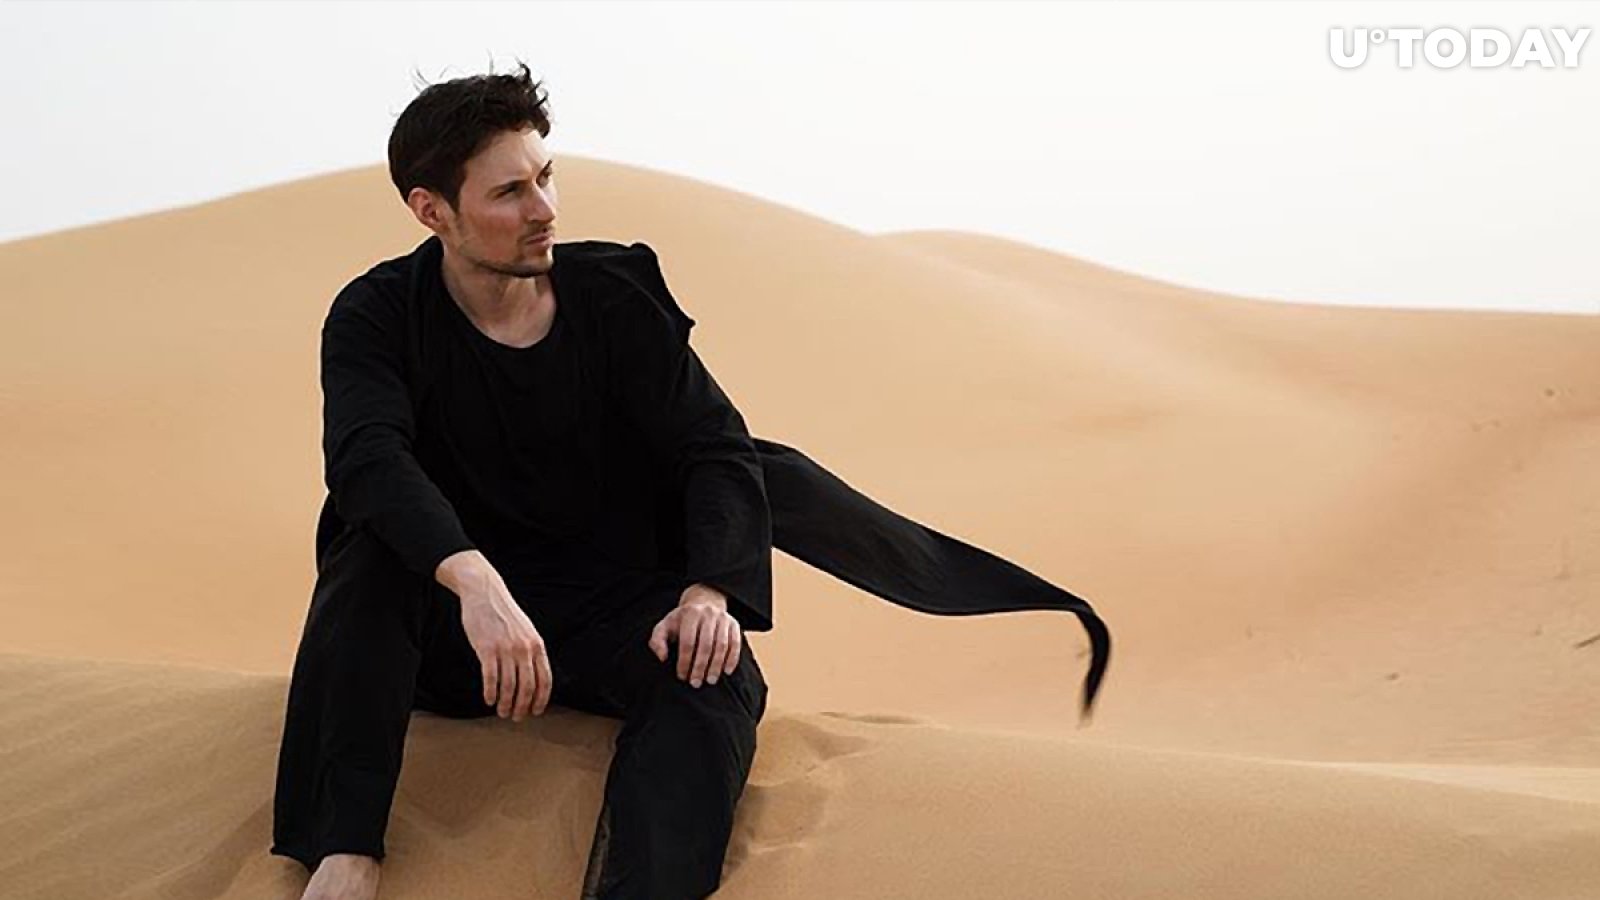 Pavel Durov to Hand Telegram to Russian Owner After TON Failure, Source Says